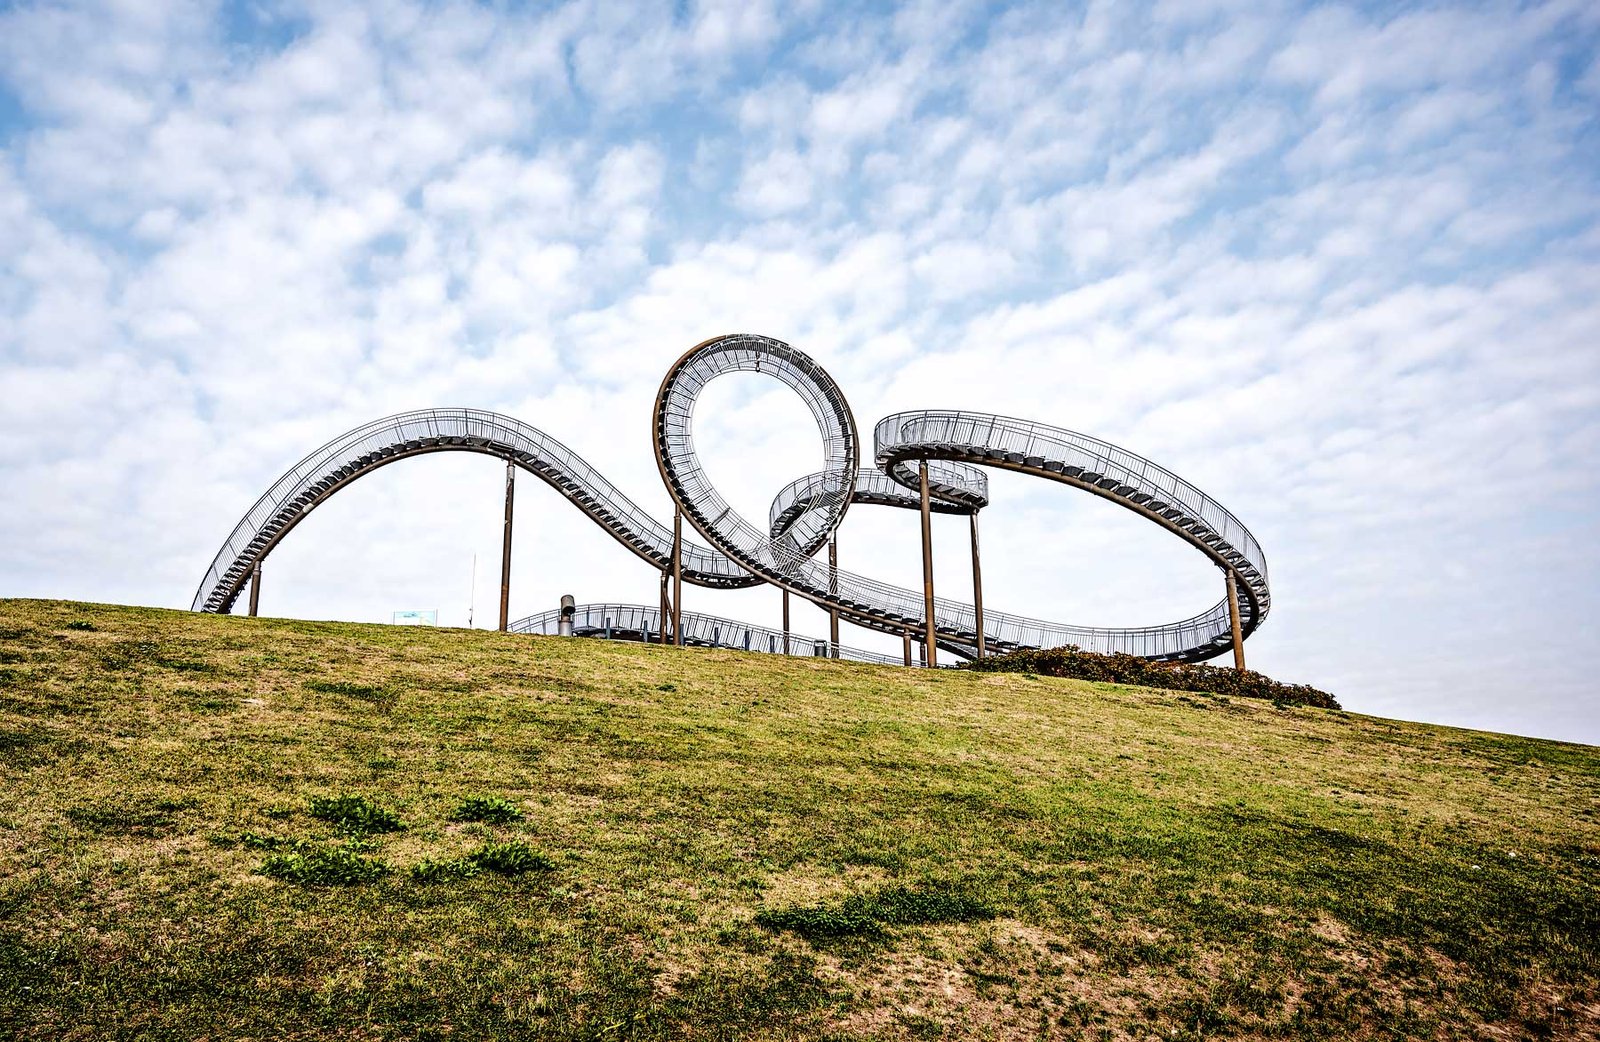 Tiger and Turtle Magic Mountain in Duisburg Germany. One of the best things to do in the Ruhr Area.